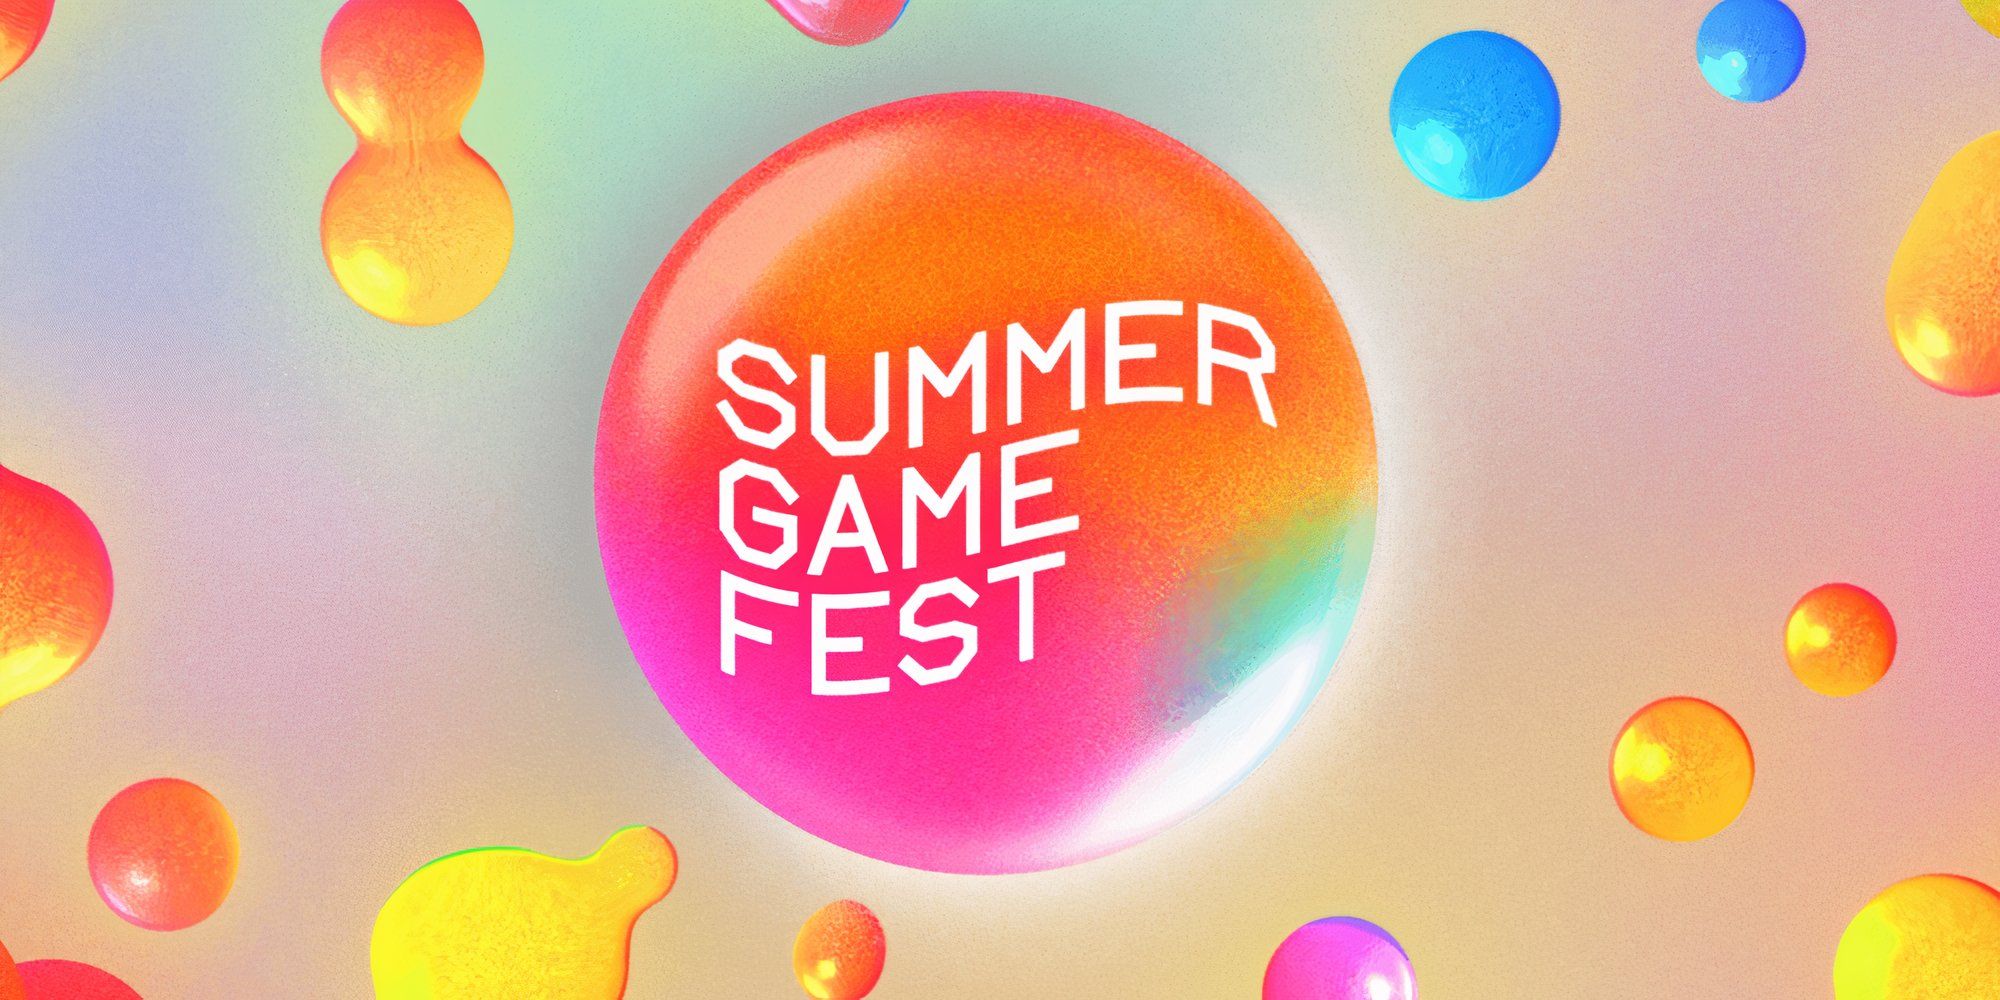 The logo for Summer Game Fest 2024, showing red, orange, yellow, and blue droplets surrounding a central circle with Summer Game Fest written inside it, all on a pink background.